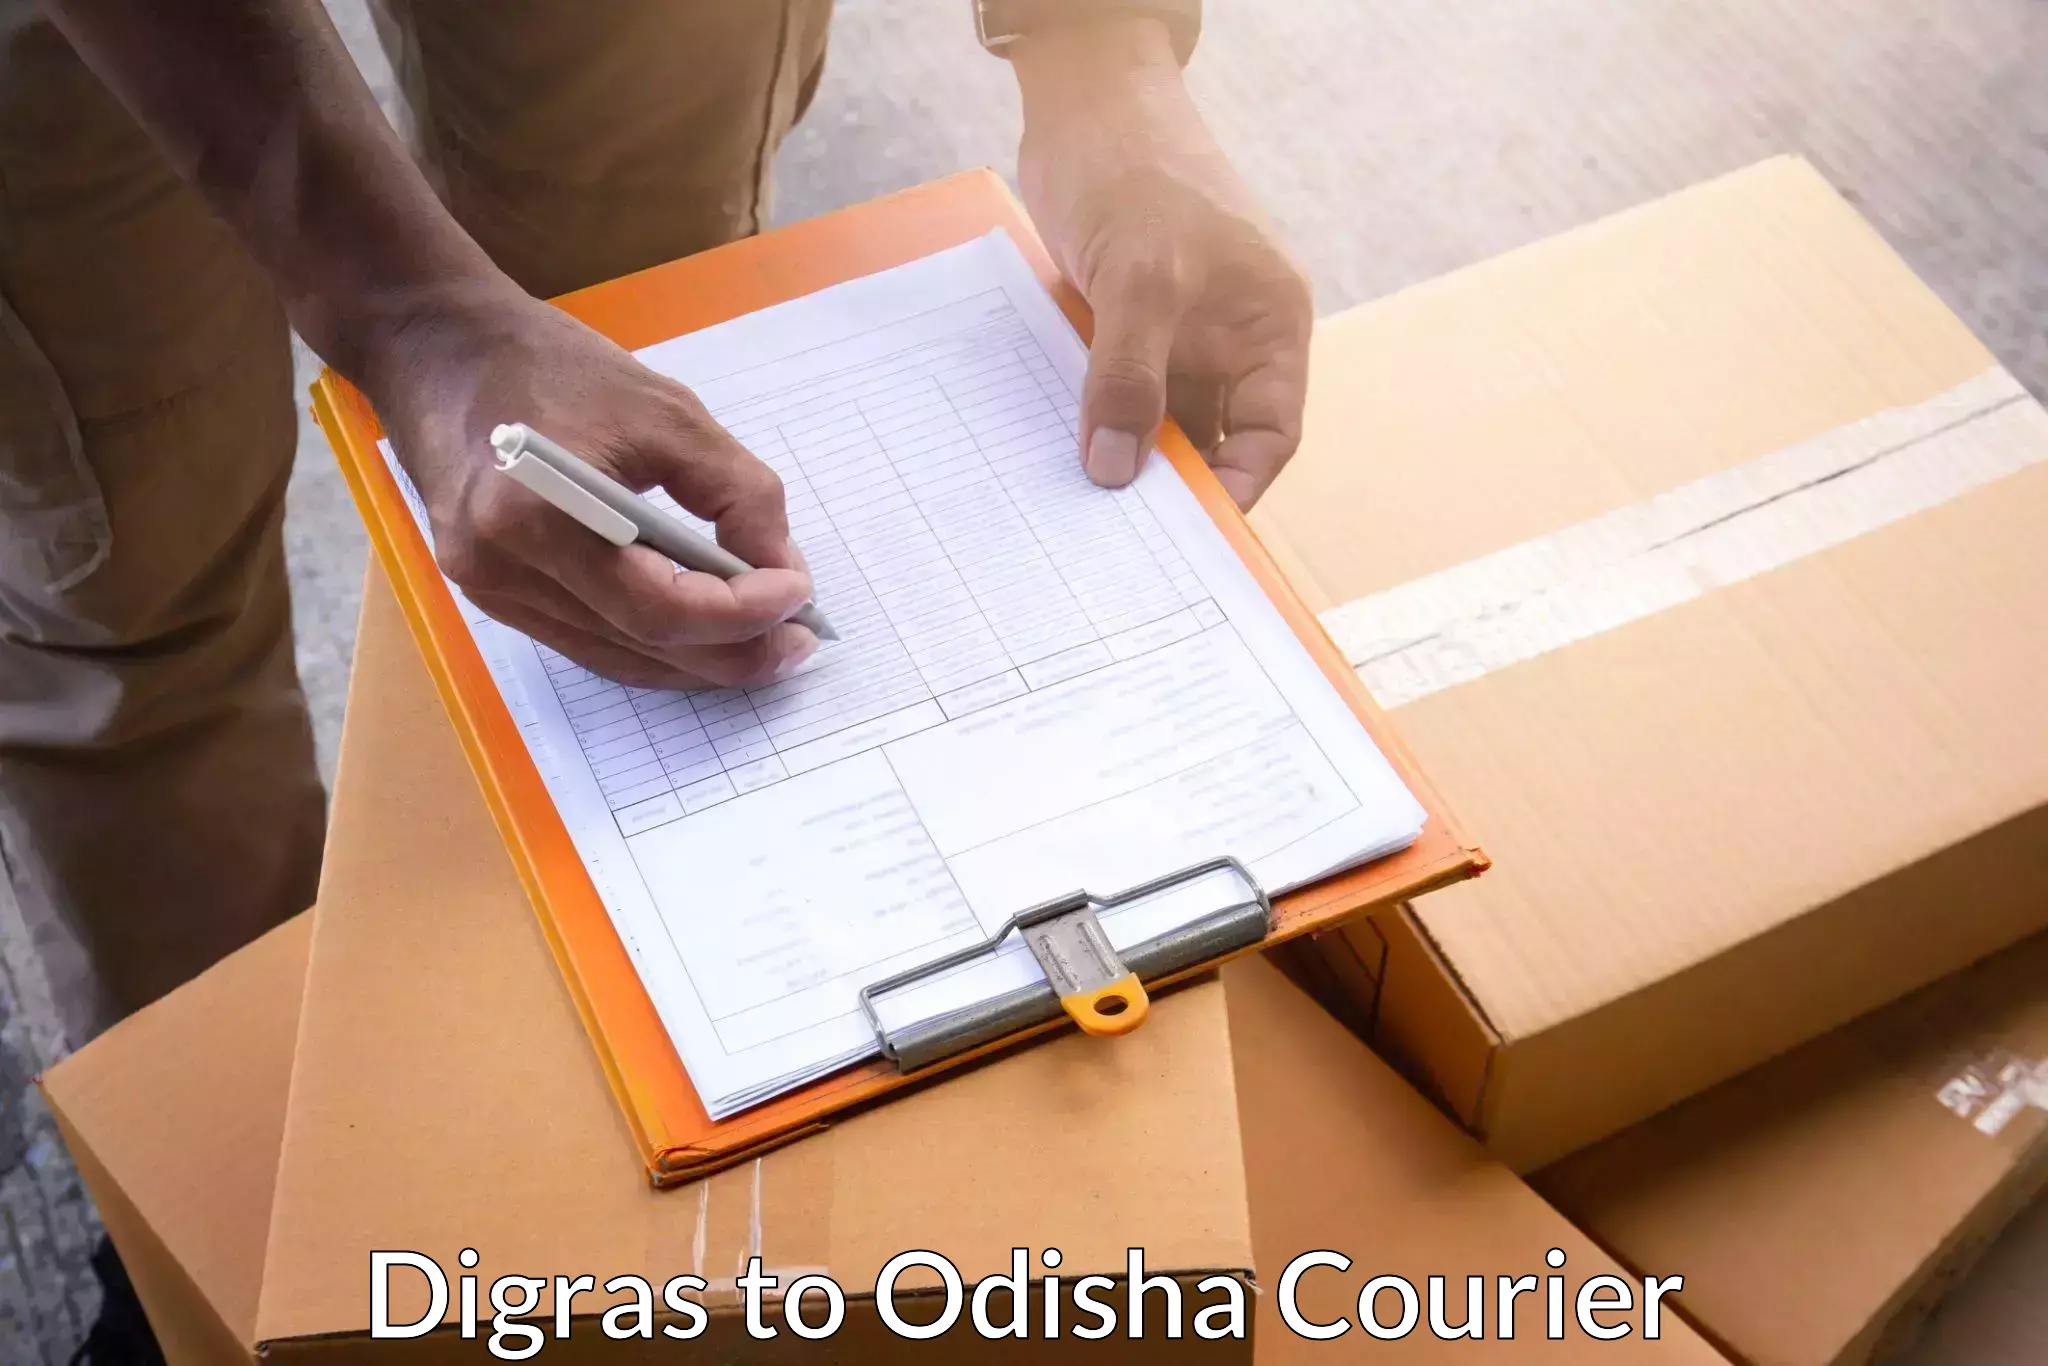 On-call courier service Digras to Odisha